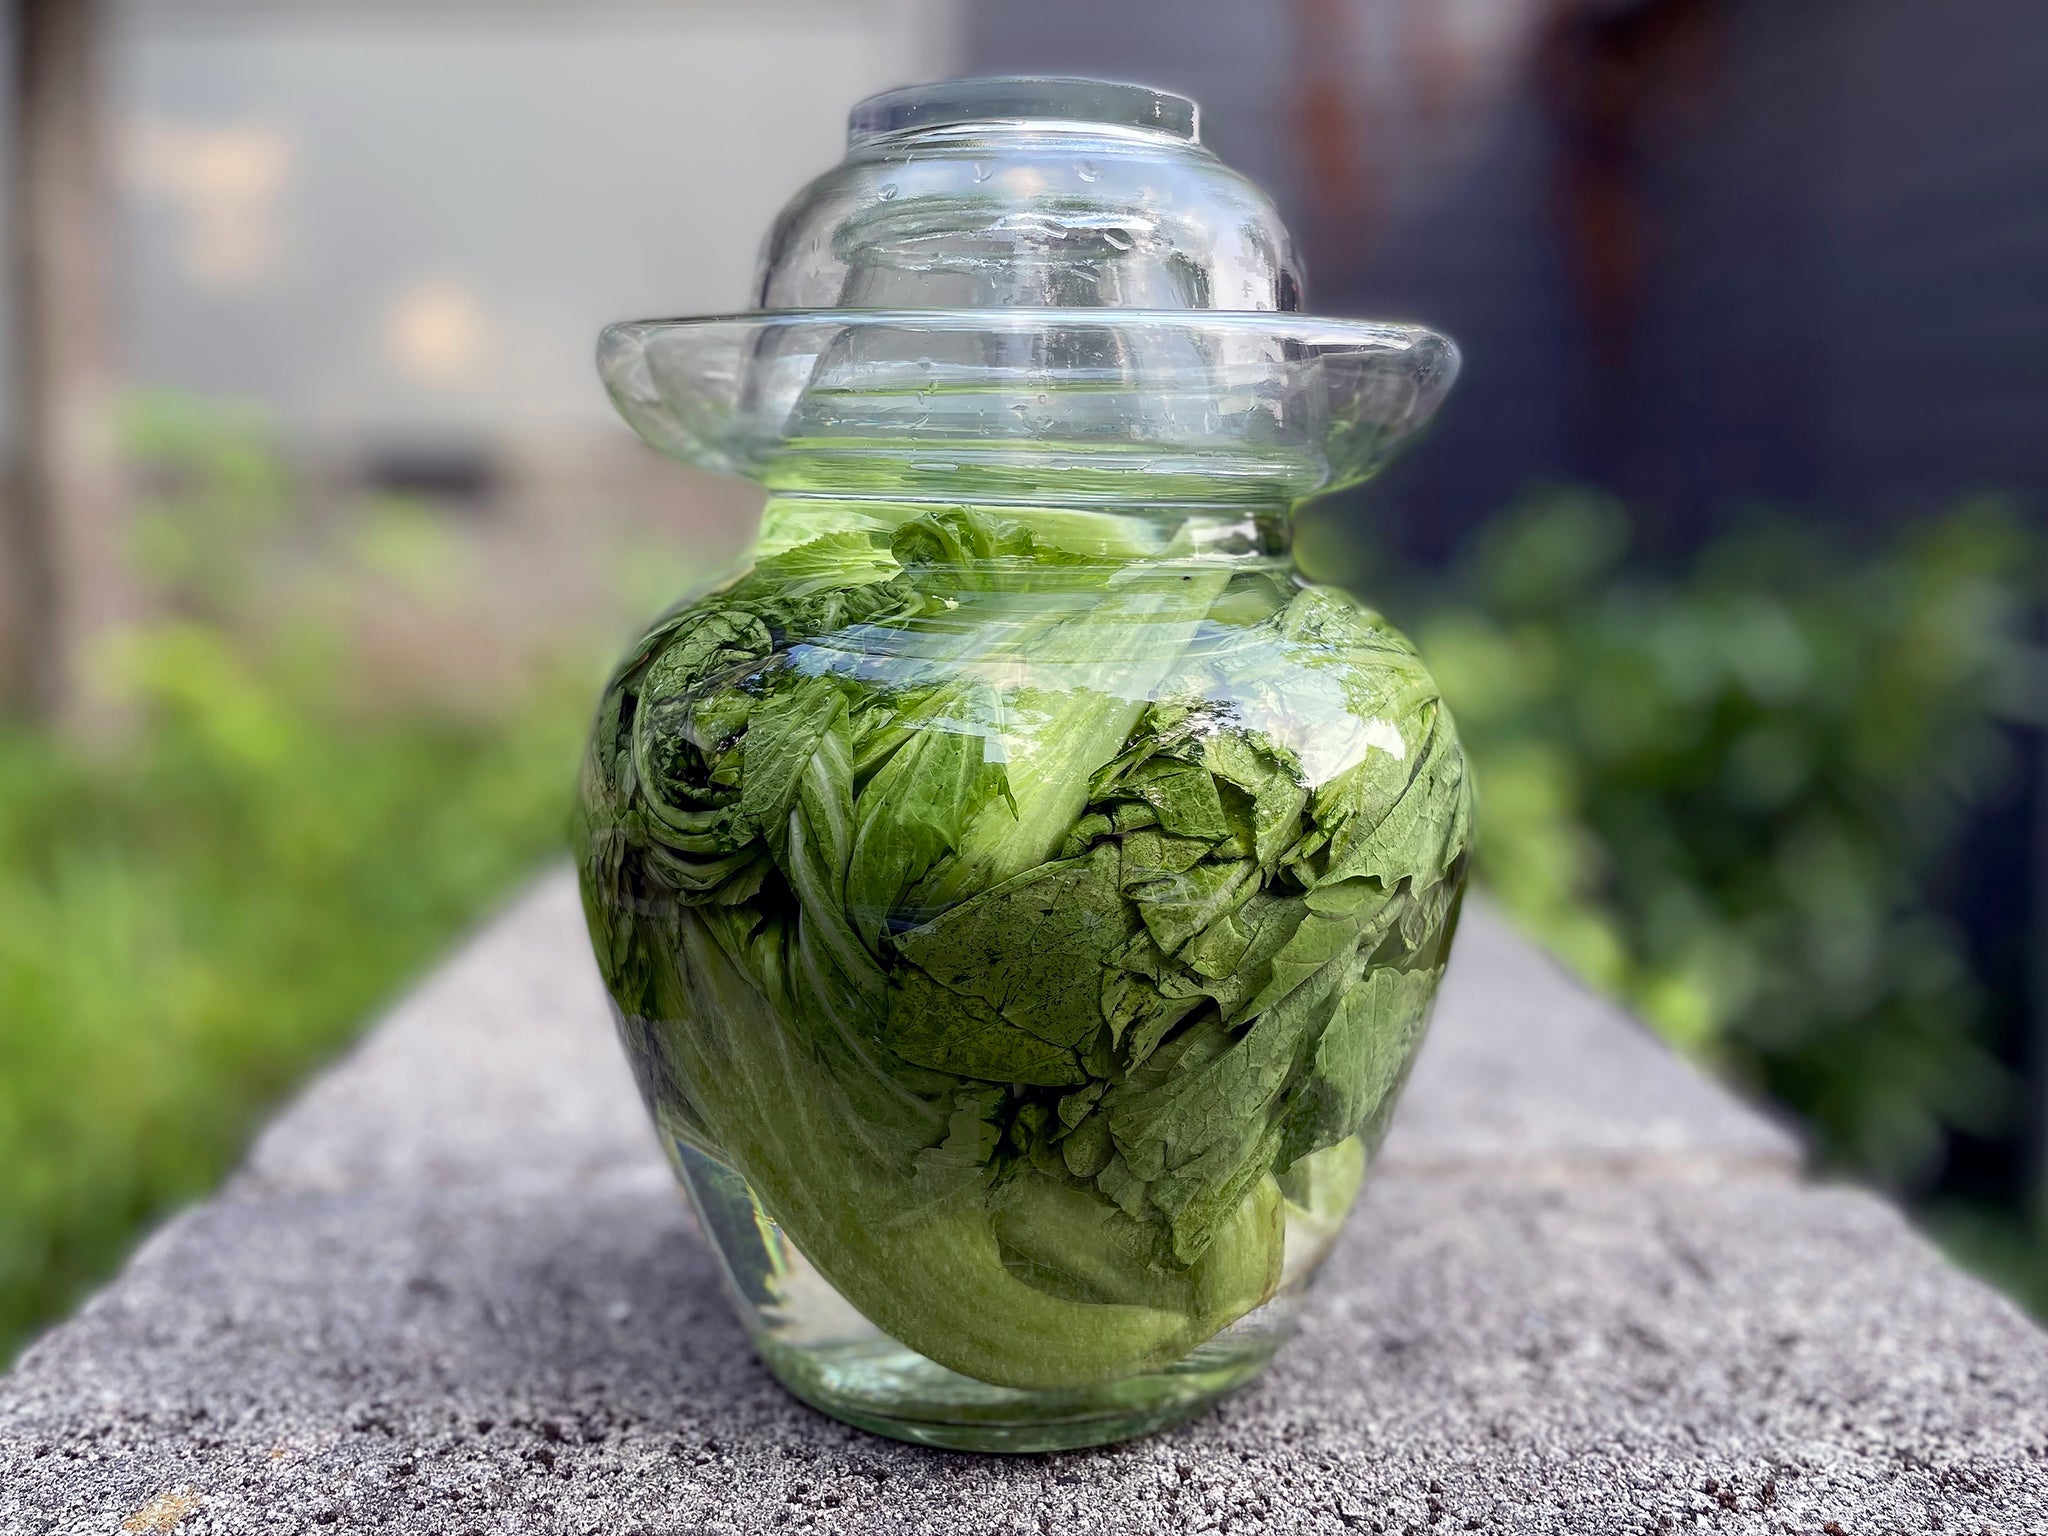 Sichuan Paocai Pickle Jar With Chinese Mustard Greens